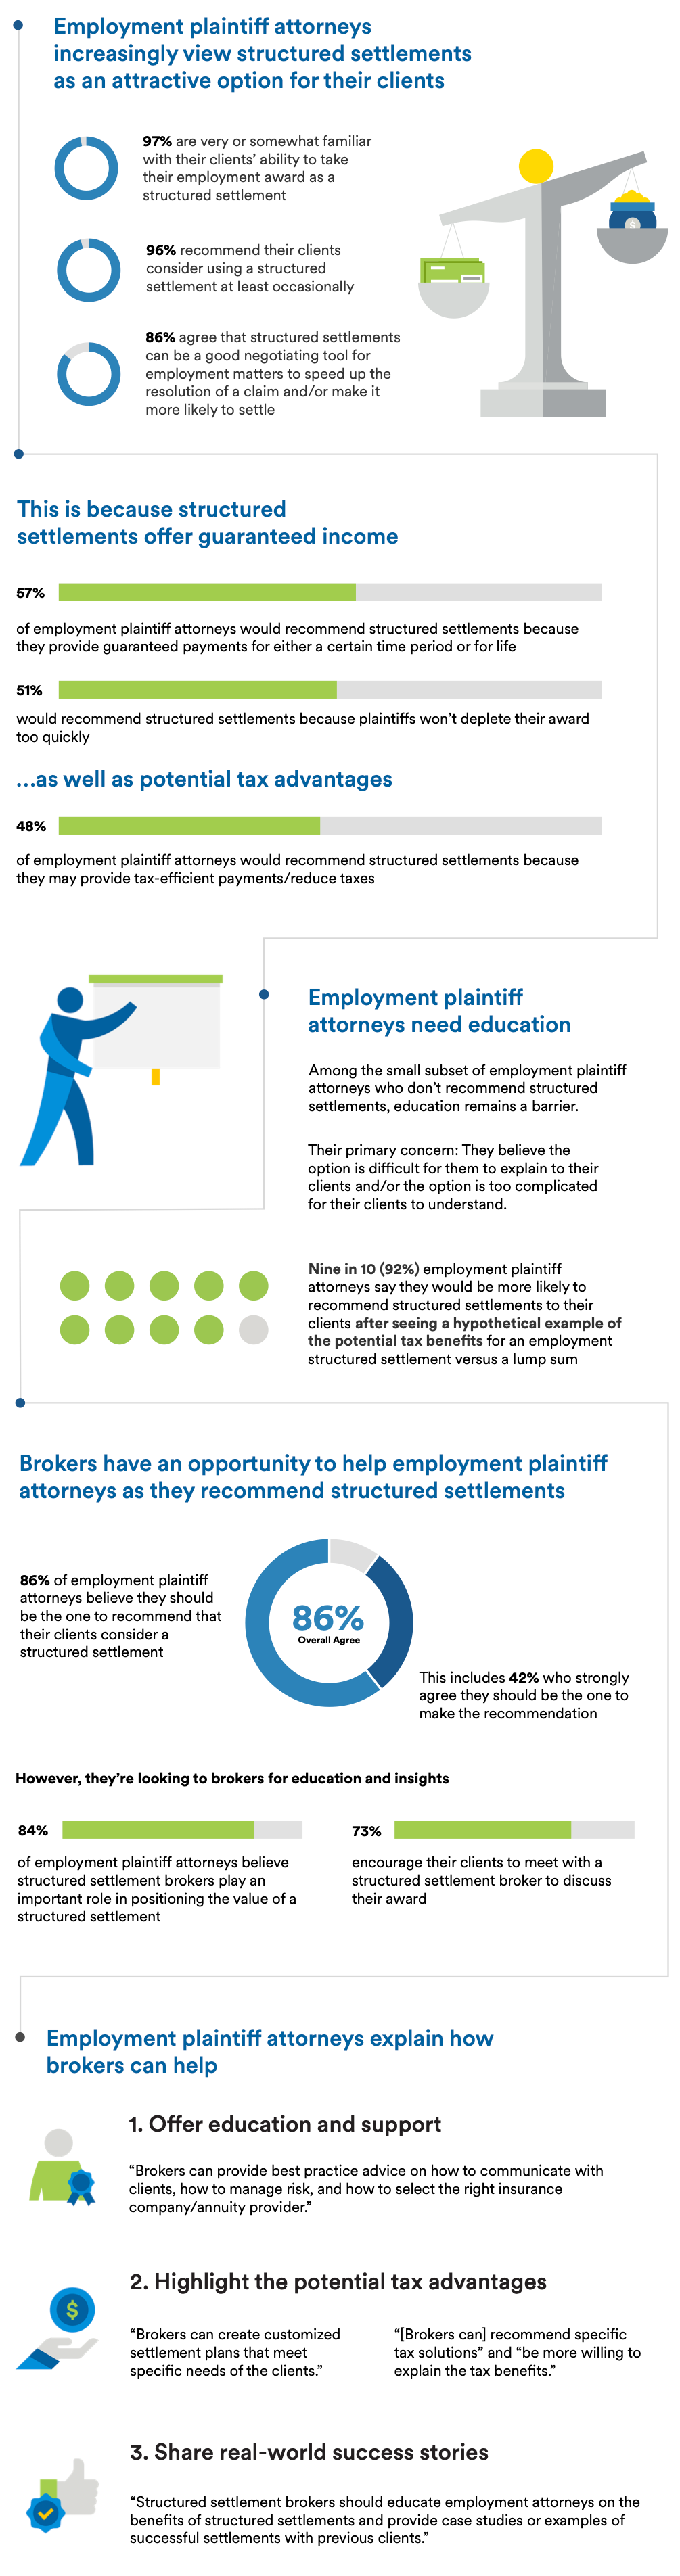 Employment plaintiff attorneys increasingly view structured settlements as an attractive option for their clients 97% are very or somewhat familiar with their clients’ ability to take their employment award as a structured settlement 96% recommend their clients consider using a structured settlement at least occasionally 86% agree that structured settlements can be a good negotiating tool for employment matters to speed up the resolution of a claim and/or make it more likely to settle This is because structured settlements offer guaranteed income 57% of employment plaintiff attorneys would recommend structured settlements because they provide guaranteed payments for either a certain time period or for life 51% would recommend structured settlements because plaintiffs won’t deplete their award too quickly ...as well as potential tax advantages 48% of employment plaintiff attorneys would recommend structured settlements because they may provide tax-efficient payments/reduce taxes Employment plaintiff attorneys need education Among the small subset of employment plaintiff attorneys who don’t recommend structured settlements, education remains a barrier. Their primary concern: They believe the option is difficult for them to explain to their clients and/or the option is too complicated for their clients to understand. Nine in 10 (92%) employment plaintiff attorneys say they would be more likely to recommend structured settlements to their clients after seeing a hypothetical example of the potential tax benefits for an employment structured settlement versus a lump sum Brokers have an opportunity to help employment plaintiff attorneys as they recommend structured settlements 86% of employment plaintiff attorneys believe they should be the one to recommend that their clients consider a structured settlement 86% Overall Agree However, they’re looking to brokers for education and insights 84% of employment plaintiff attorneys believe structured settlement brokers play an important role in positioning the value of a structured settlement 73% encourage their clients to meet with a structured settlement broker to discuss their award This includes 42% who strongly agree they should be the one to make the recommendation Employment plaintiff attorneys explain how brokers can help 1. Offer education and support “Brokers can provide best practice advice on how to communicate with clients, how to manage risk, and how to select the right insurance company/annuity provider.” 2. Highlight the potential tax advantages “Brokers can create customized settlement plans that meet specific needs of the clients.” “[Brokers can] recommend specific tax solutions” and “be more willing to explain the tax benefits.” 3. Share real-world success stories “Structured settlement brokers should educate employment attorneys on the benefits of structured settlements and provide case studies or examples of successful settlements with previous clients.”